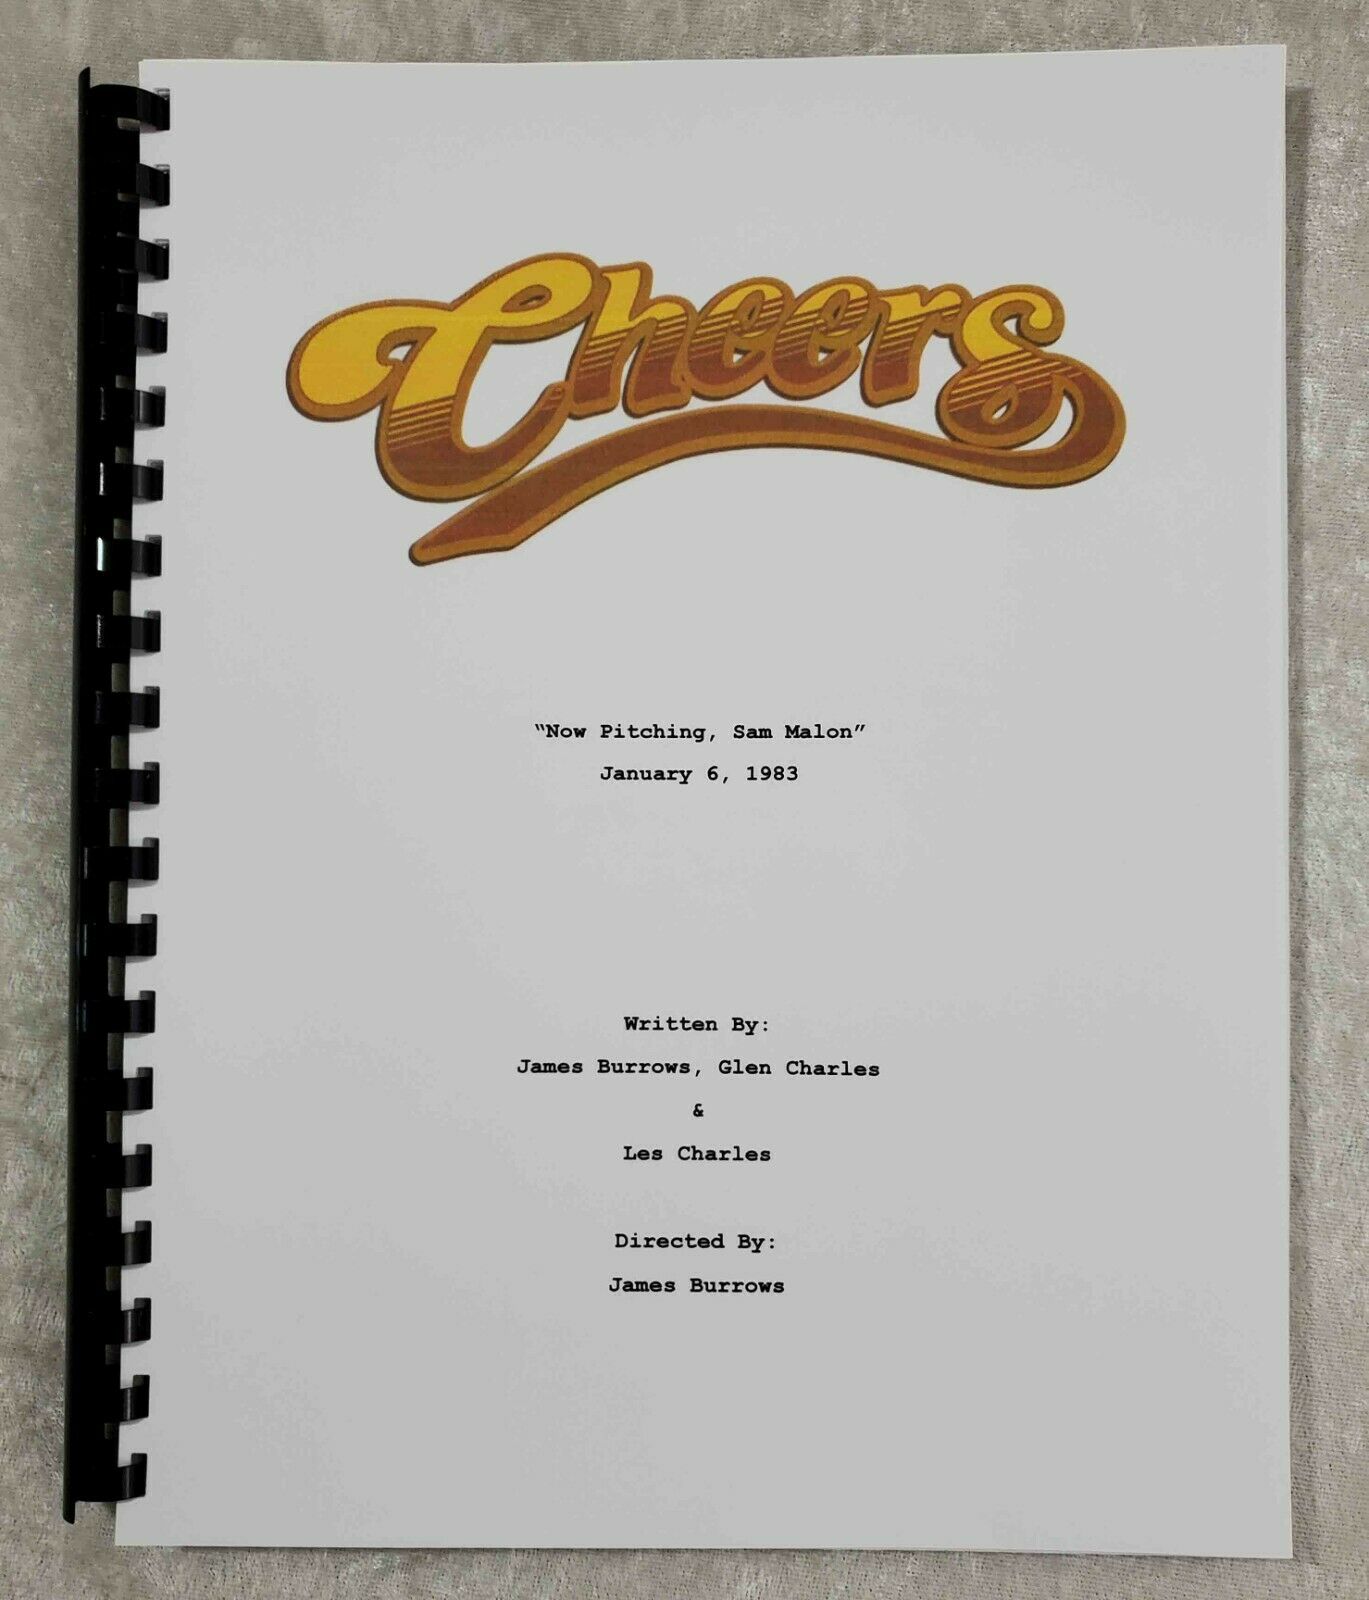 Cheers Reprint Full Tv Episode Script 1983 "now Pitching, Sam Malone" Episode